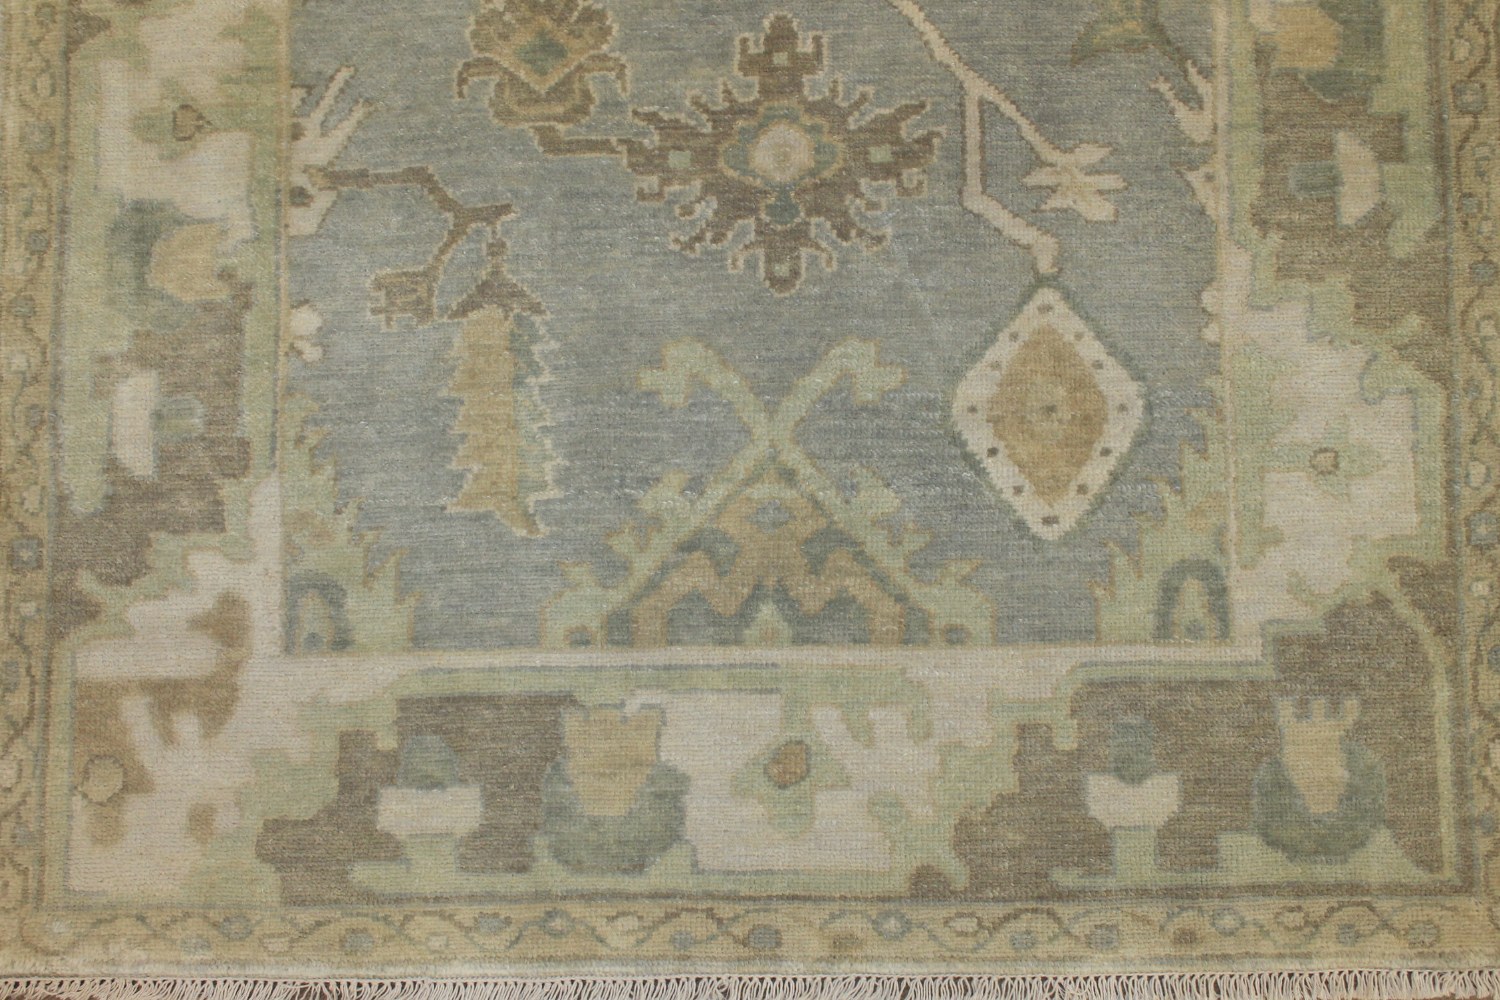 4x6 Oushak Hand Knotted Wool Area Rug - MR025142